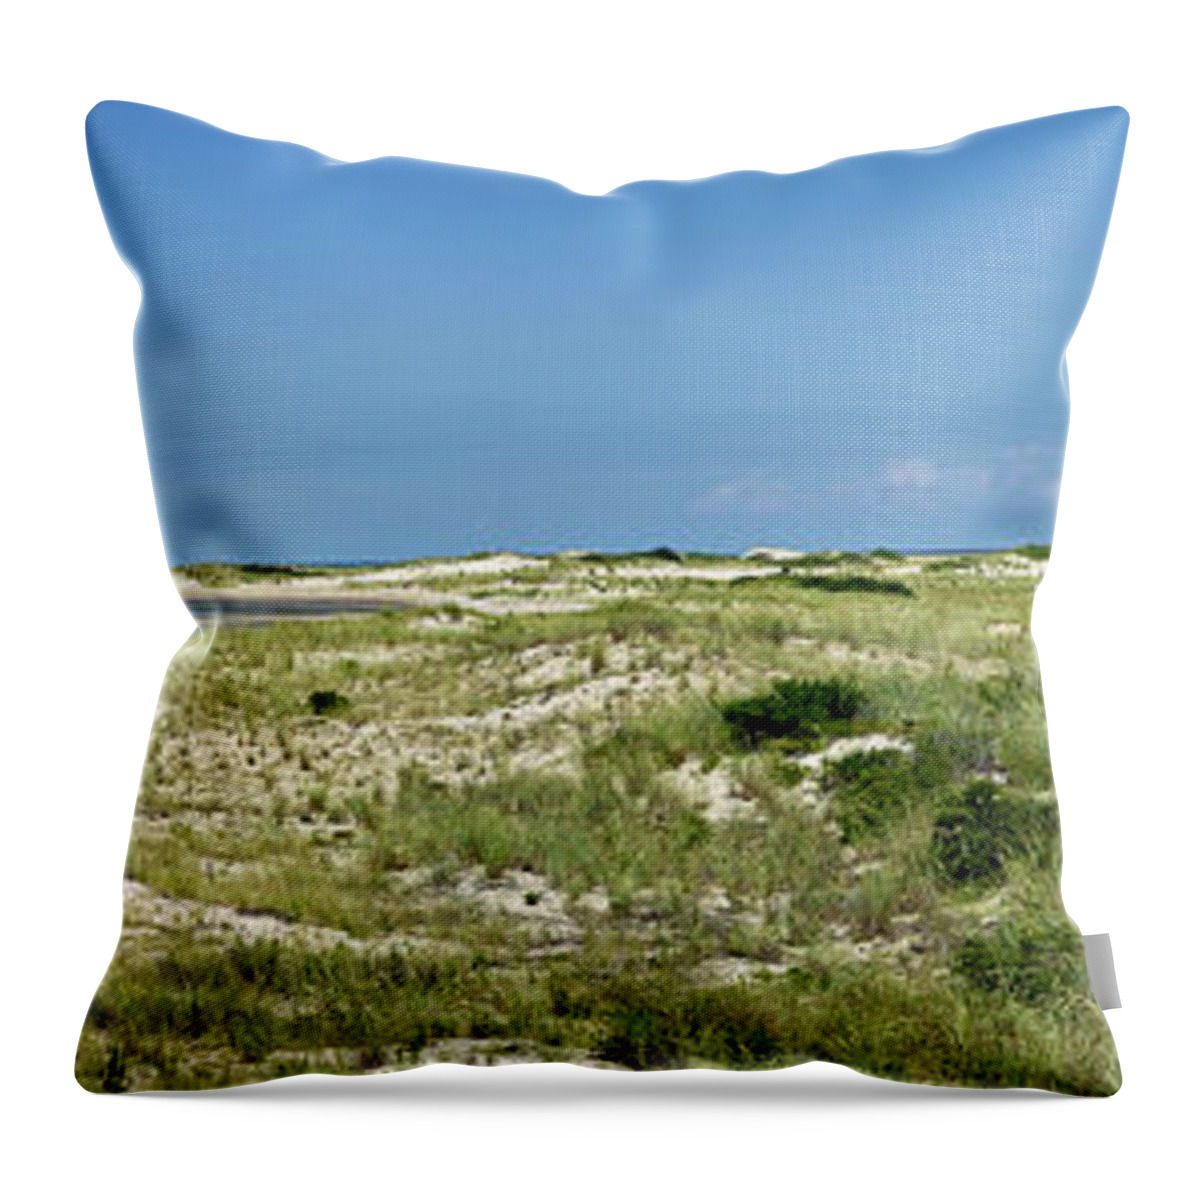 Cape Henlopen State Park Throw Pillow featuring the photograph Cape Henlopen State Park - The Point - Delaware by Brendan Reals